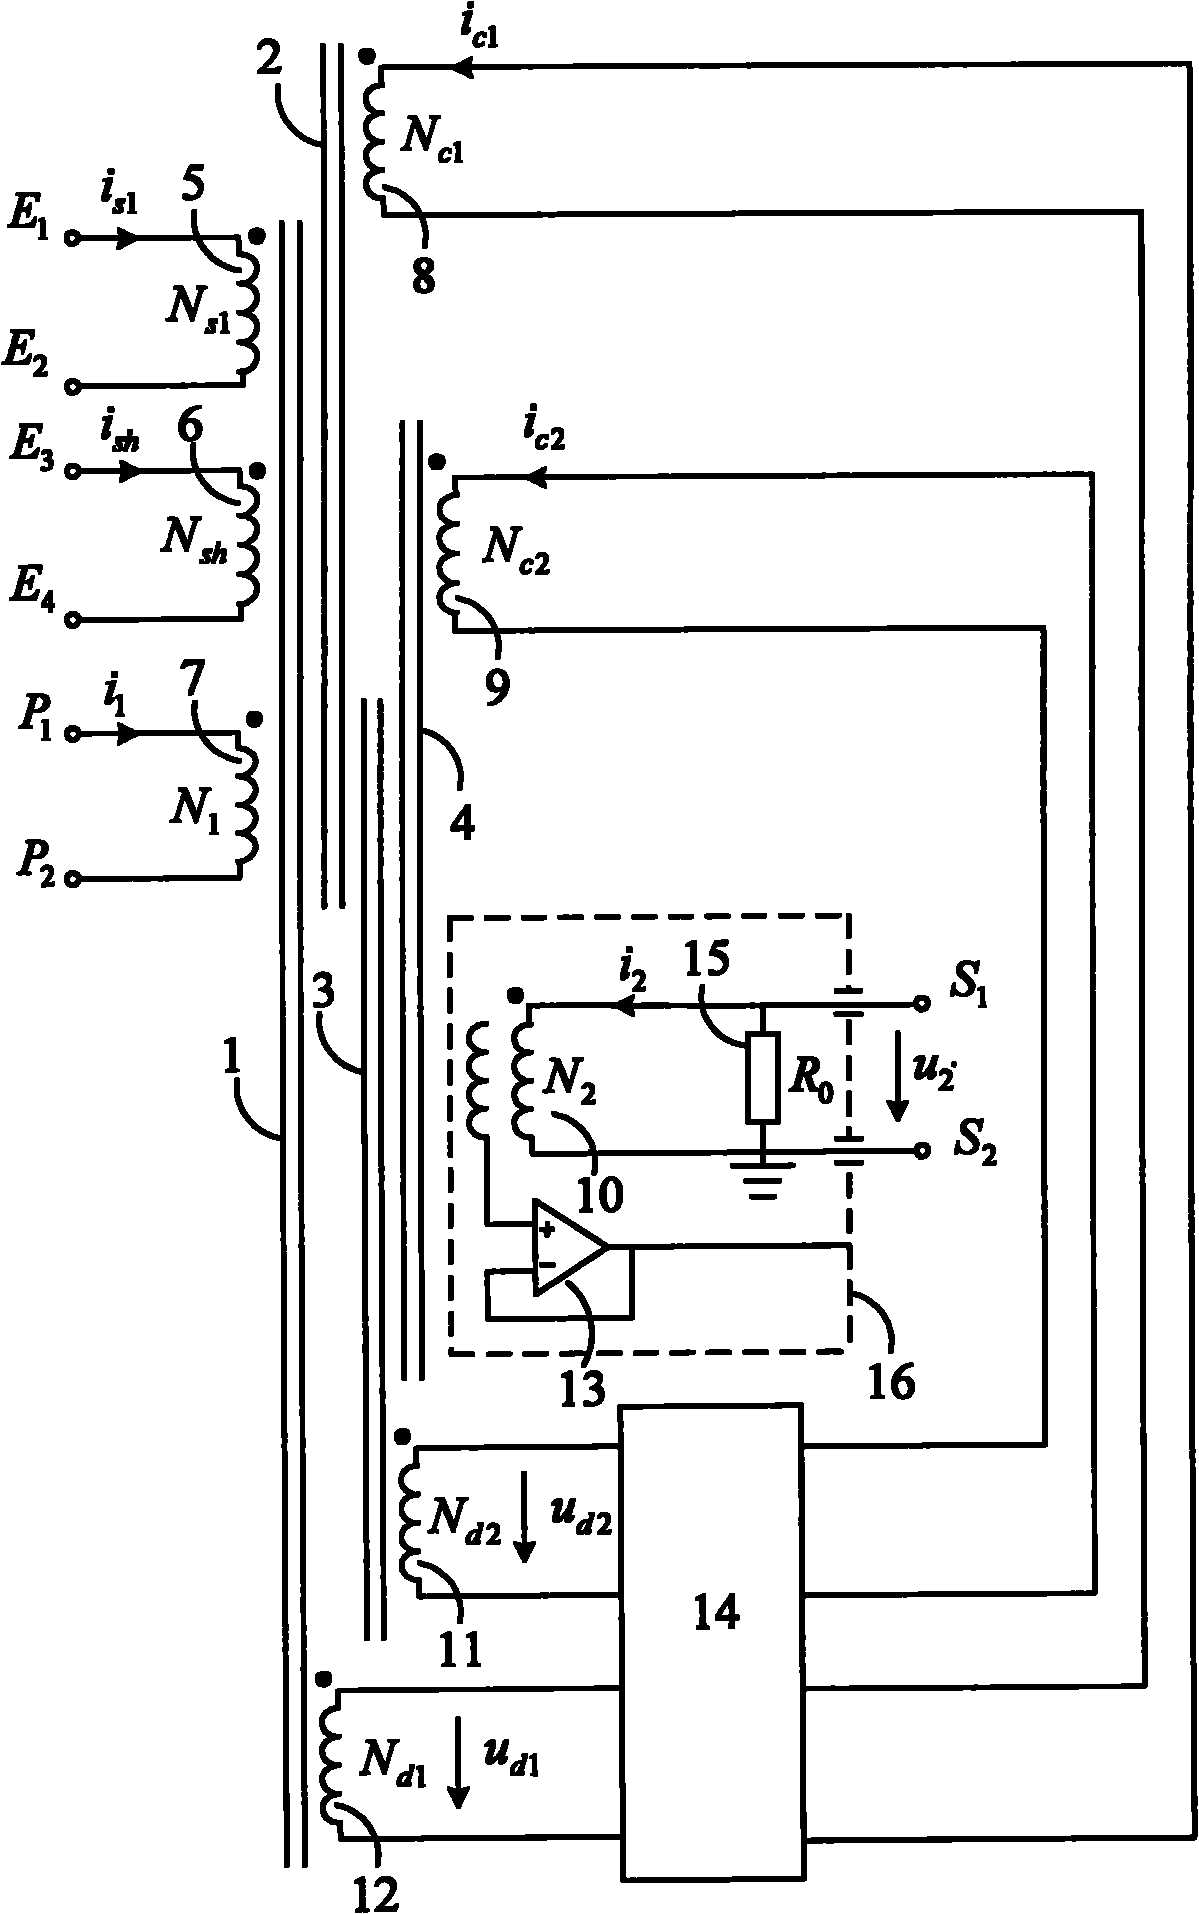 Periodic non-sinusoidal wave reference of electronic current transformer with current booster